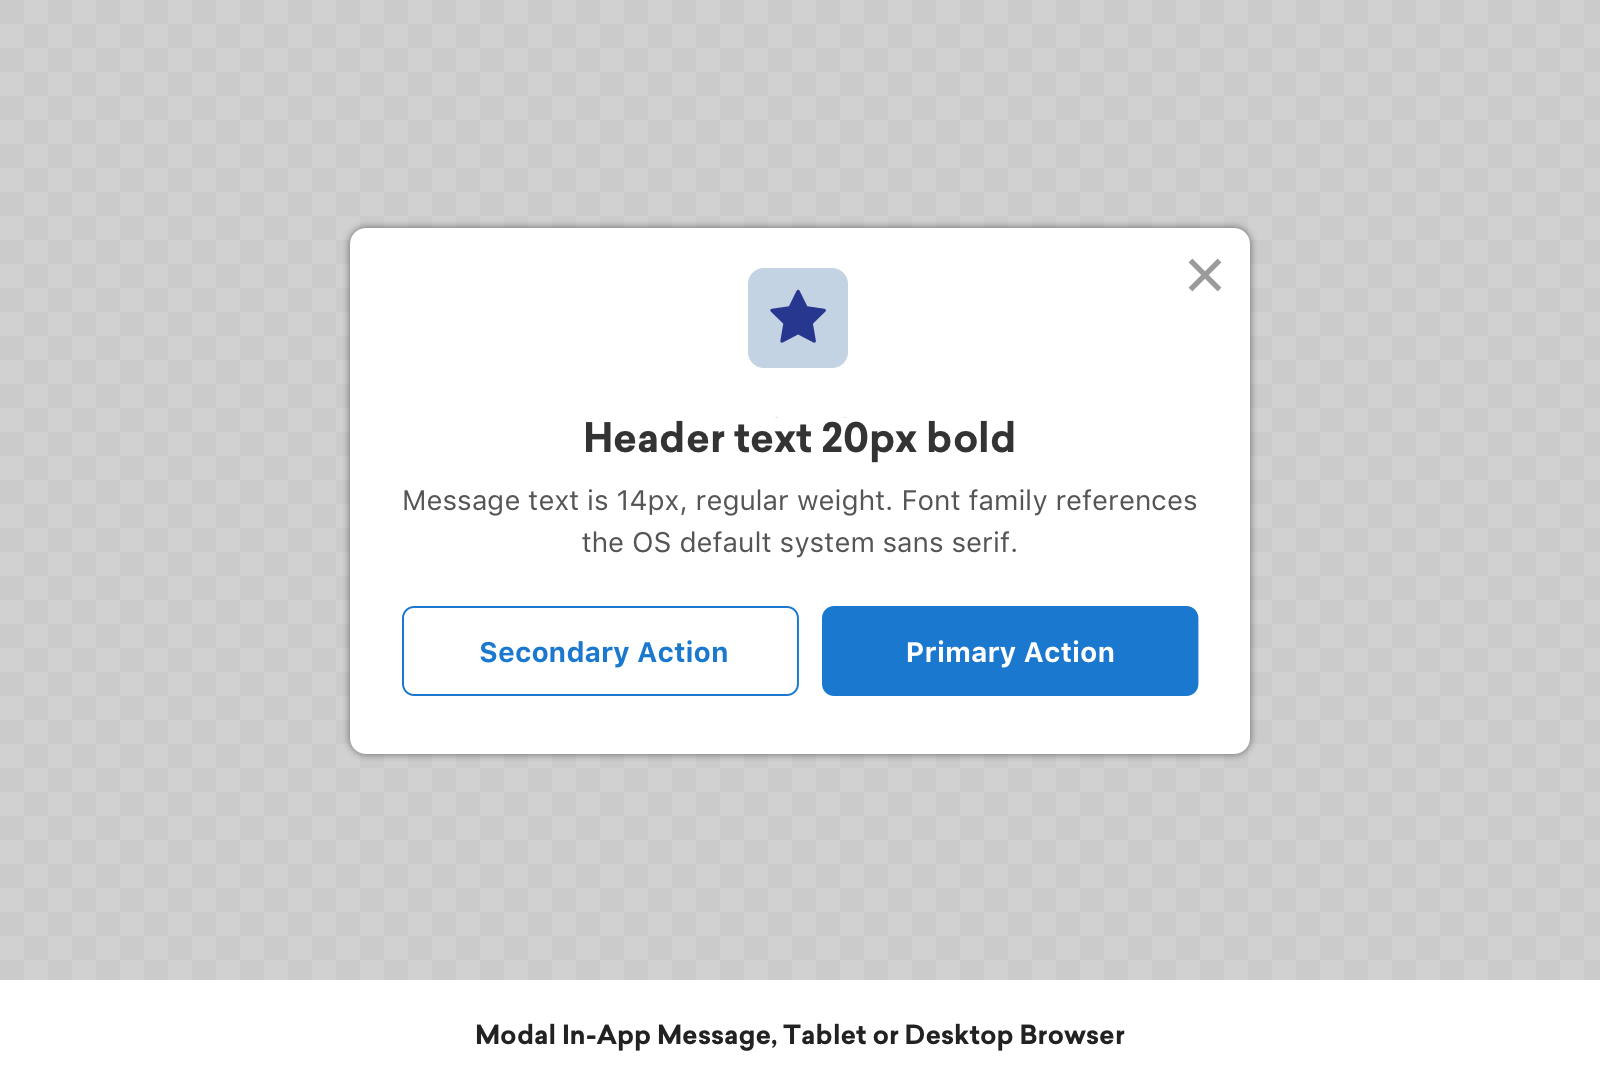 Modal in-app message as it would appear on a large screen. Similarly to phone screens, the message sits in the center of the screen.